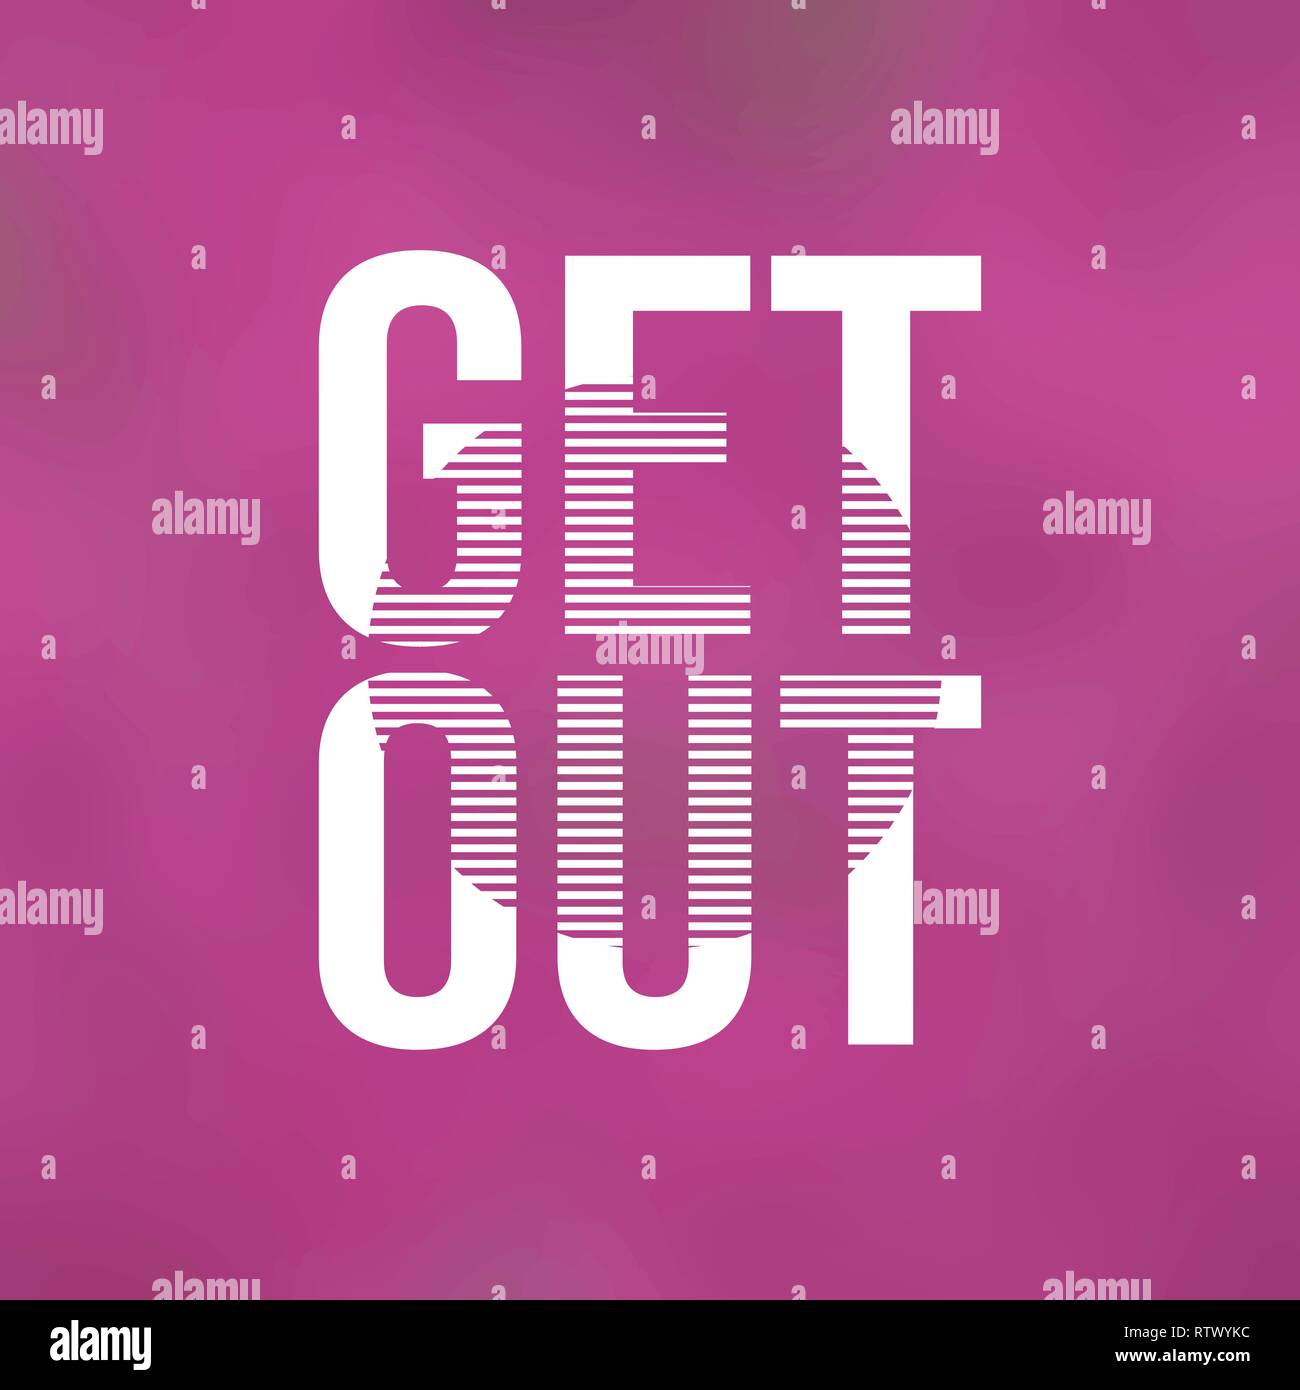 get out. Life quote with modern background vector illustration Stock Vector